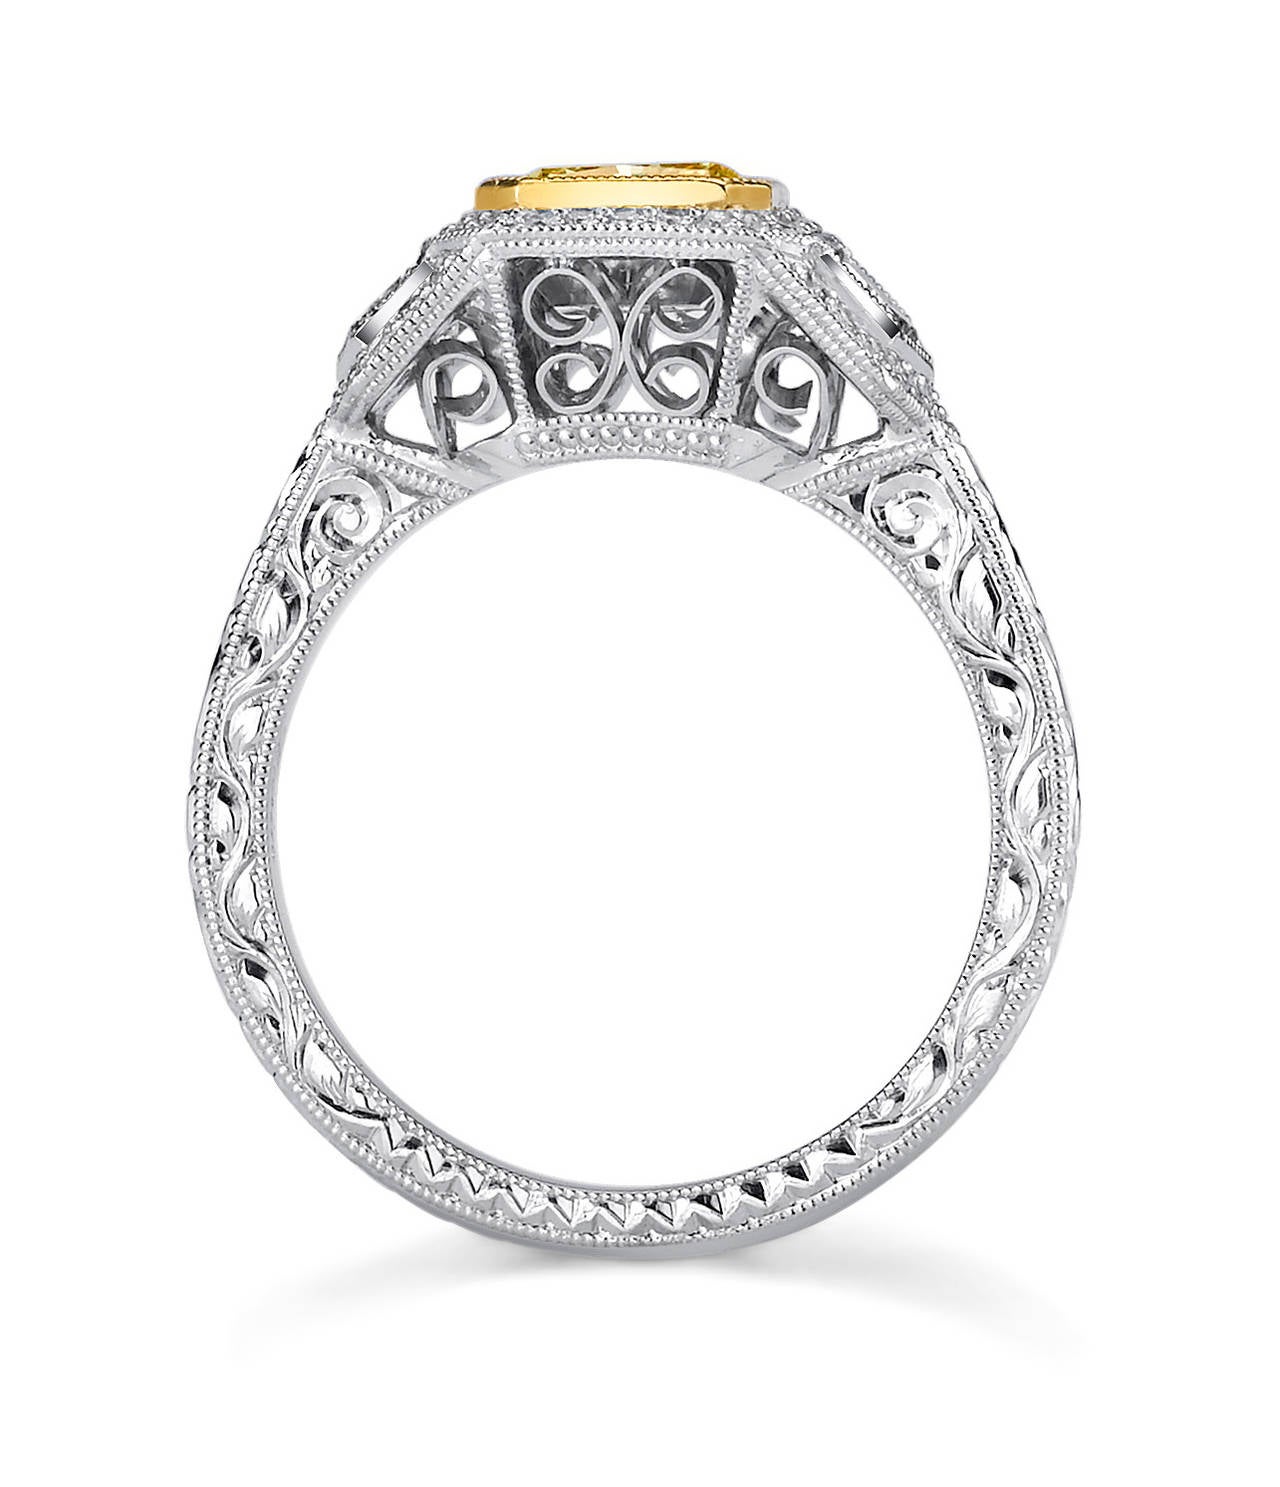 This stunning ring has 1.11 CT (GIA certified) square modified Brilliant Yellow Diamond framed in 18 Karat Yellow Gold. The center stone is accented with 0.65 CT Trapezoid Side Diamonds and 0.60 CT White and Vivid Yellow Diamonds.

The band of